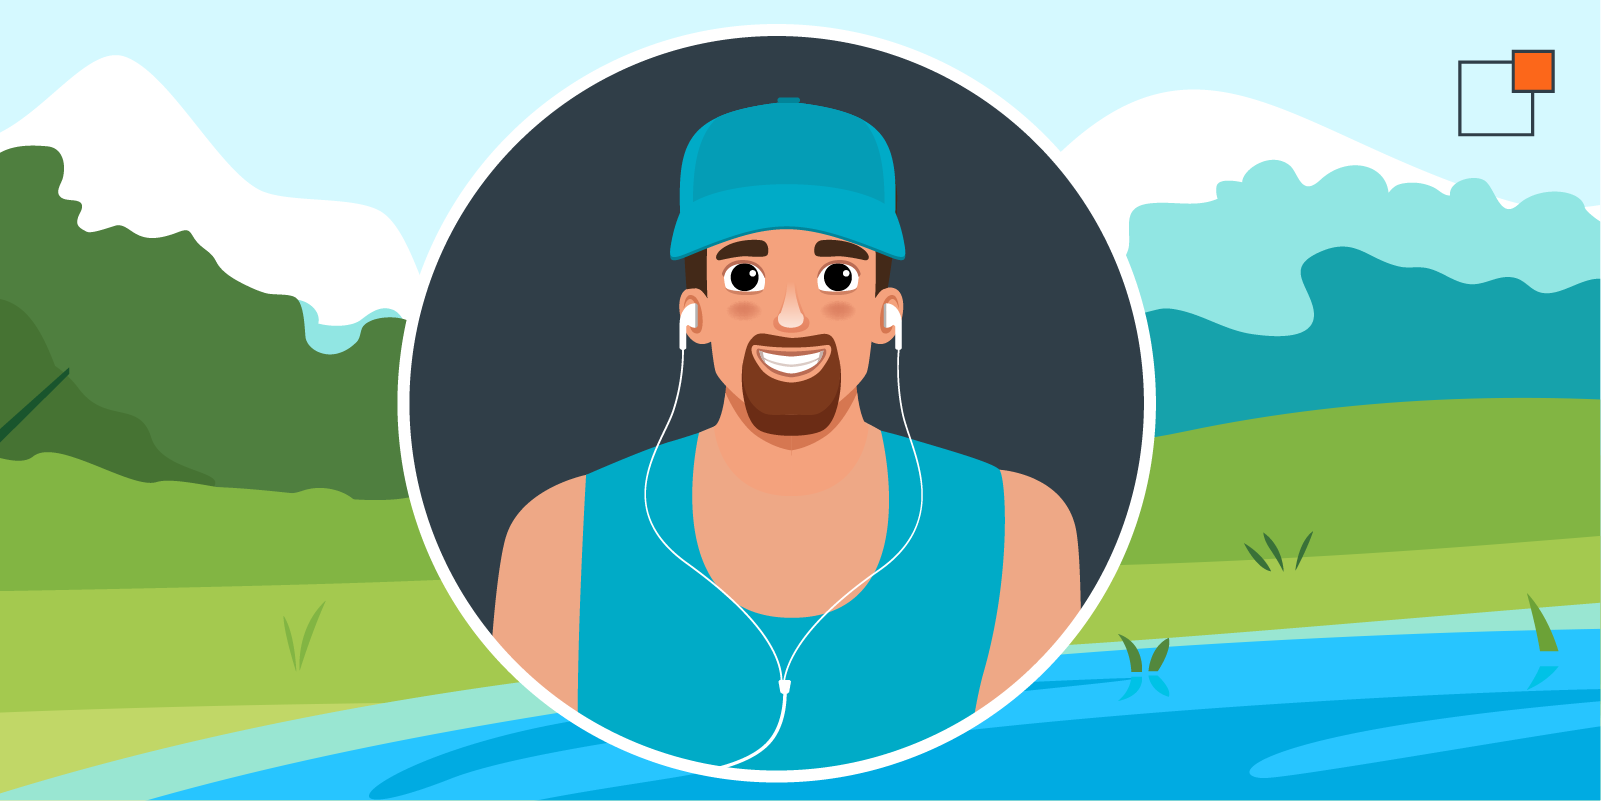 graphic of a guy with a baseball hat on, wearing a blue tank top with headphones in and sunscreen on his nose in front of a lake and mountain scene